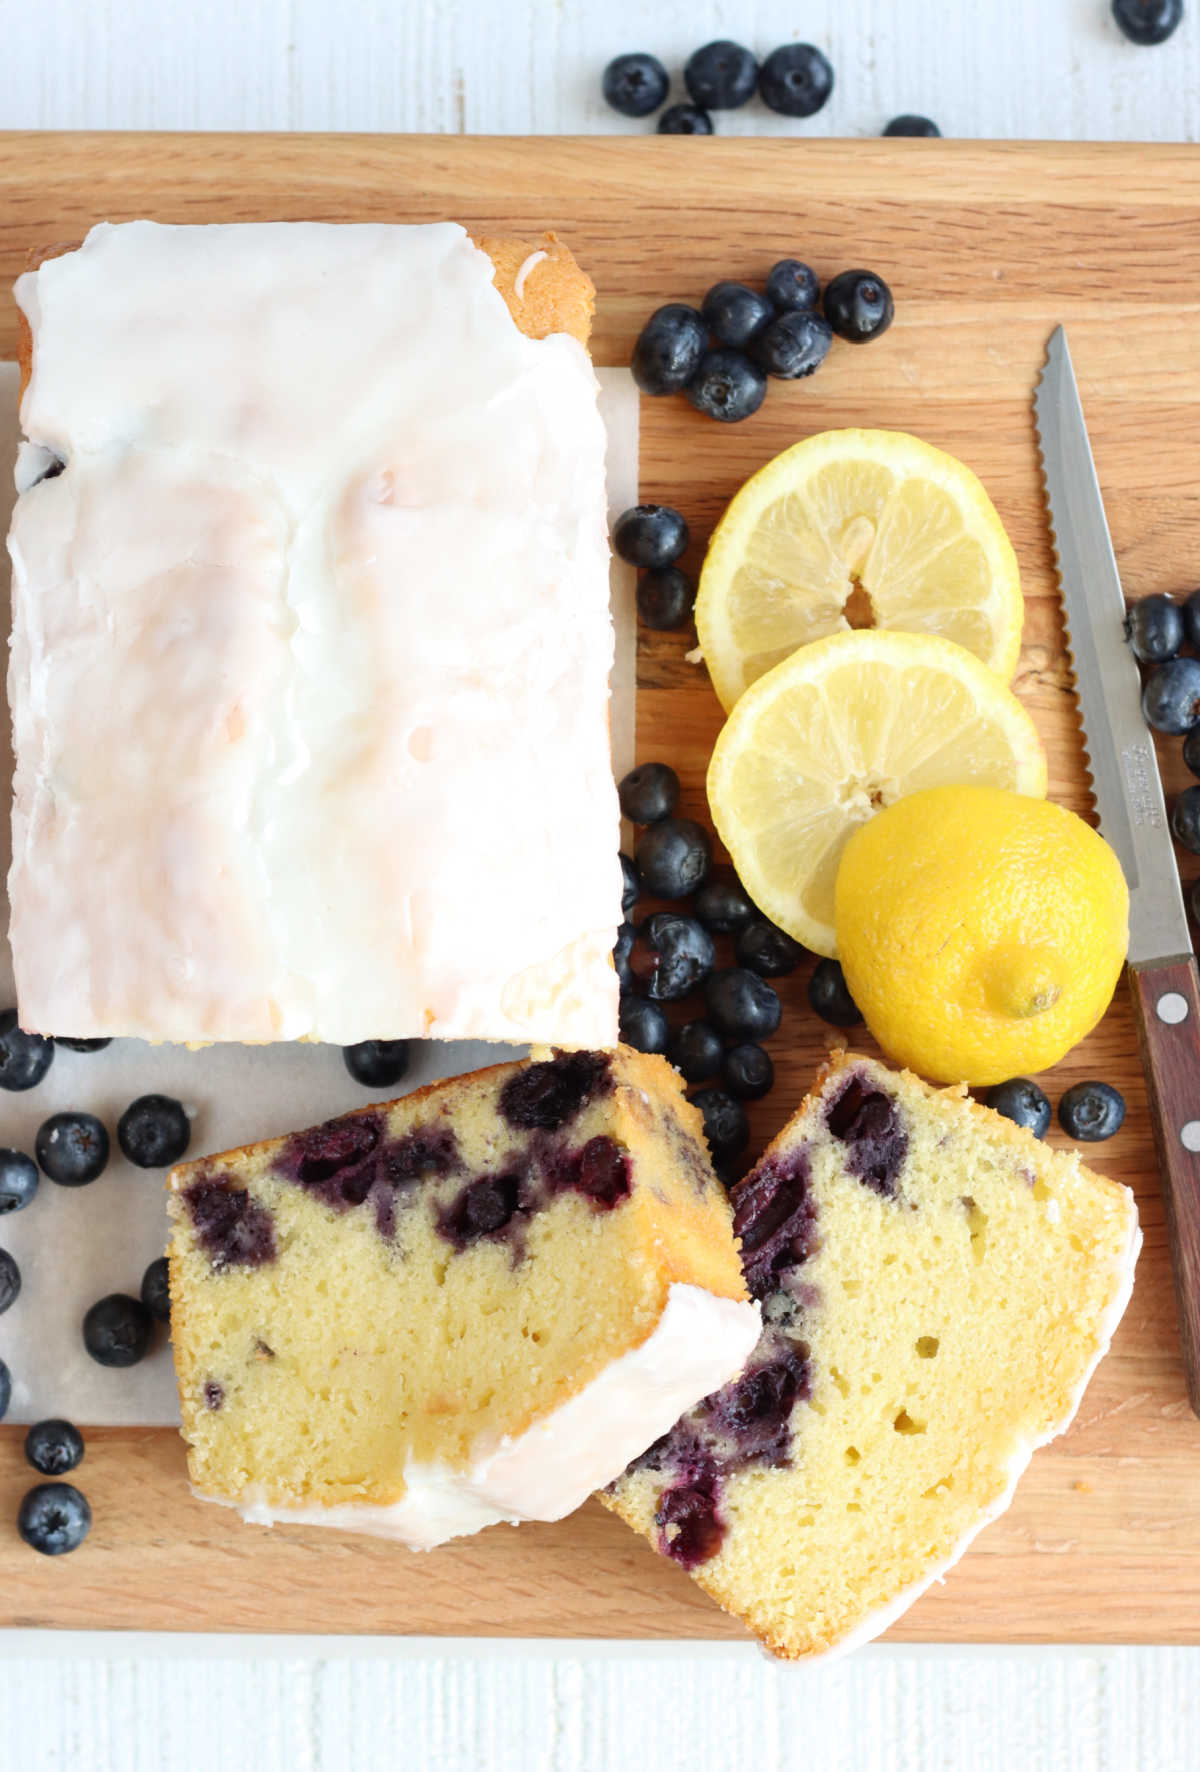 Lemon blueberry loaf cake sliced partially on wooden cutting board.